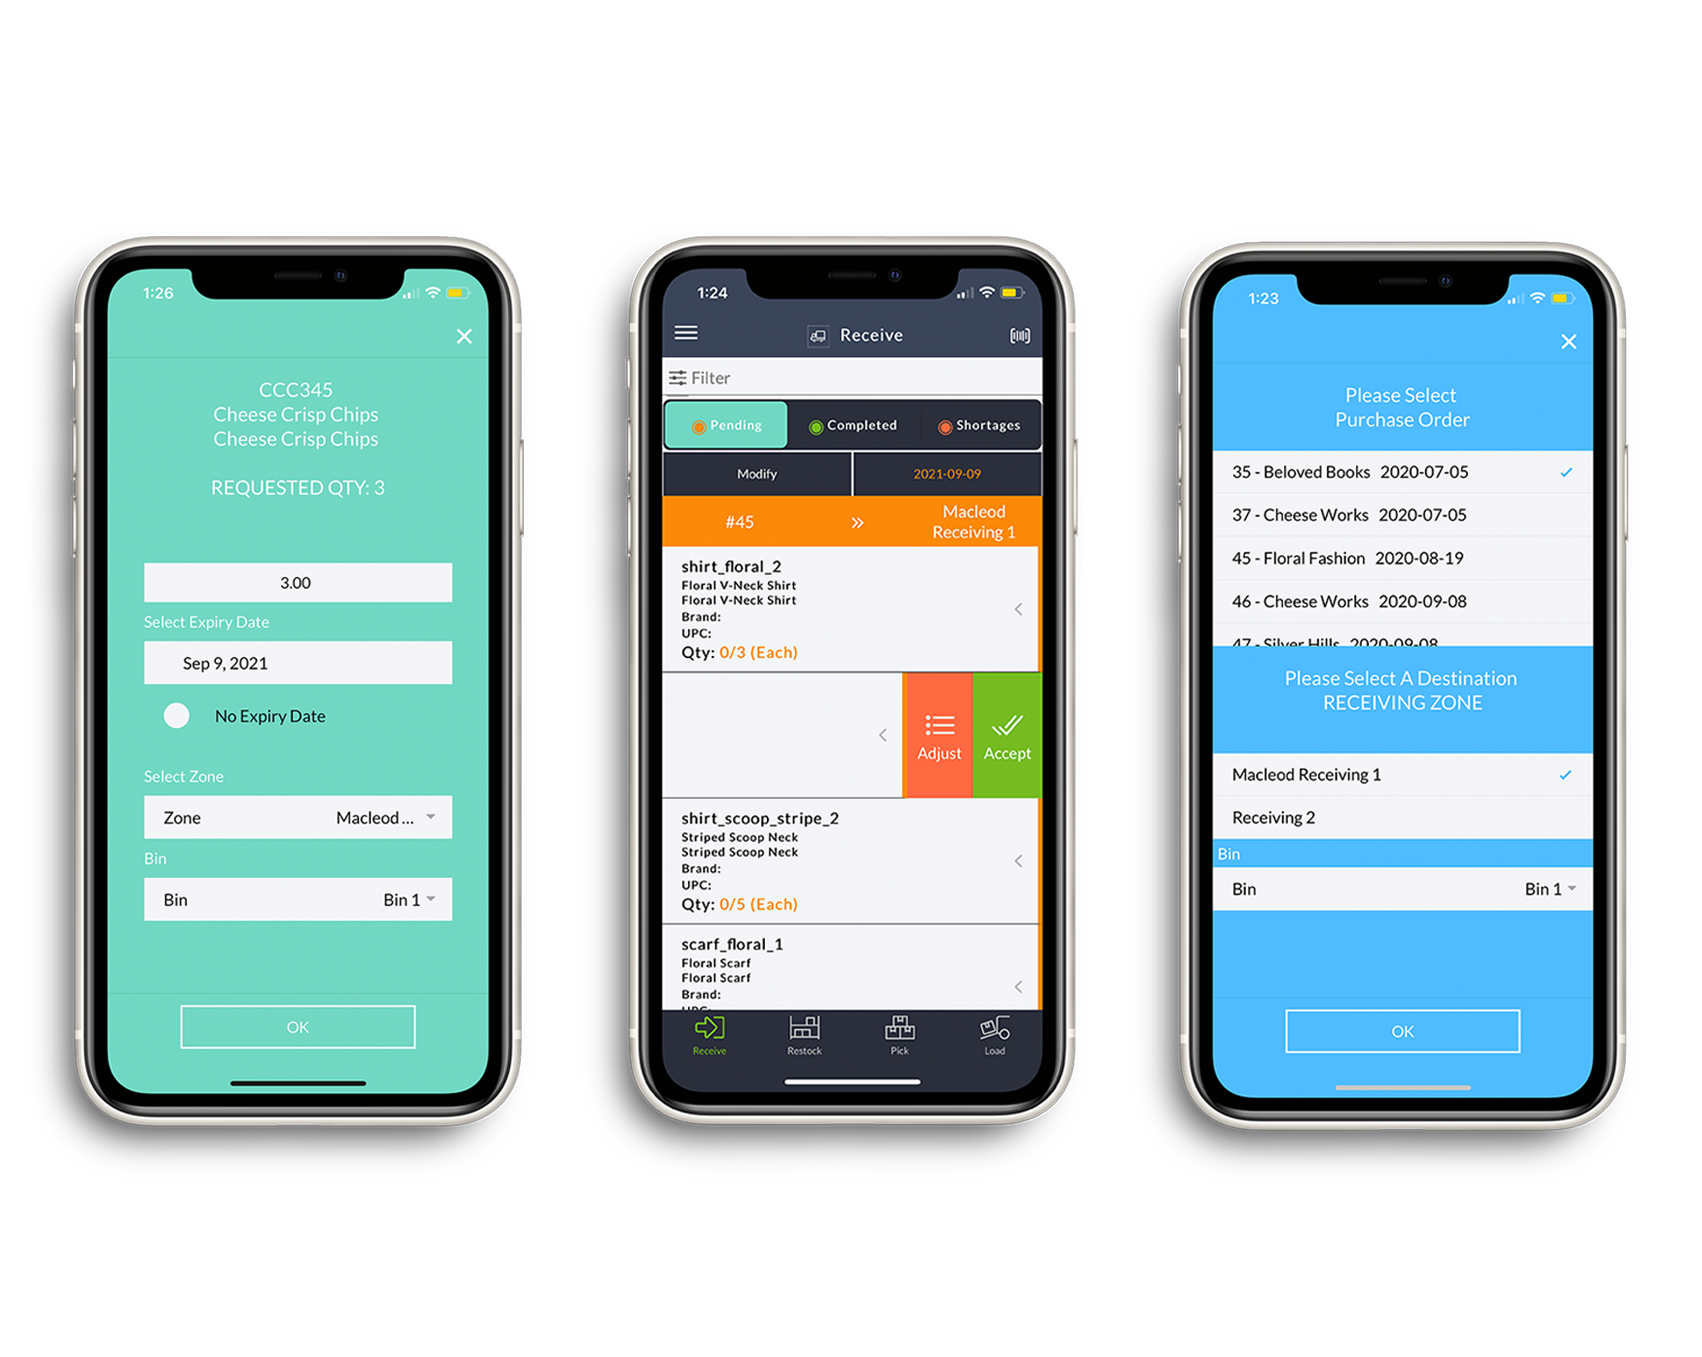 Inventory Management App - Track the entire warehouse fulfilment process through a smartphone. The app syncs with the Digital Control Tower, giving you real-time insights into inventory and fulfilment.